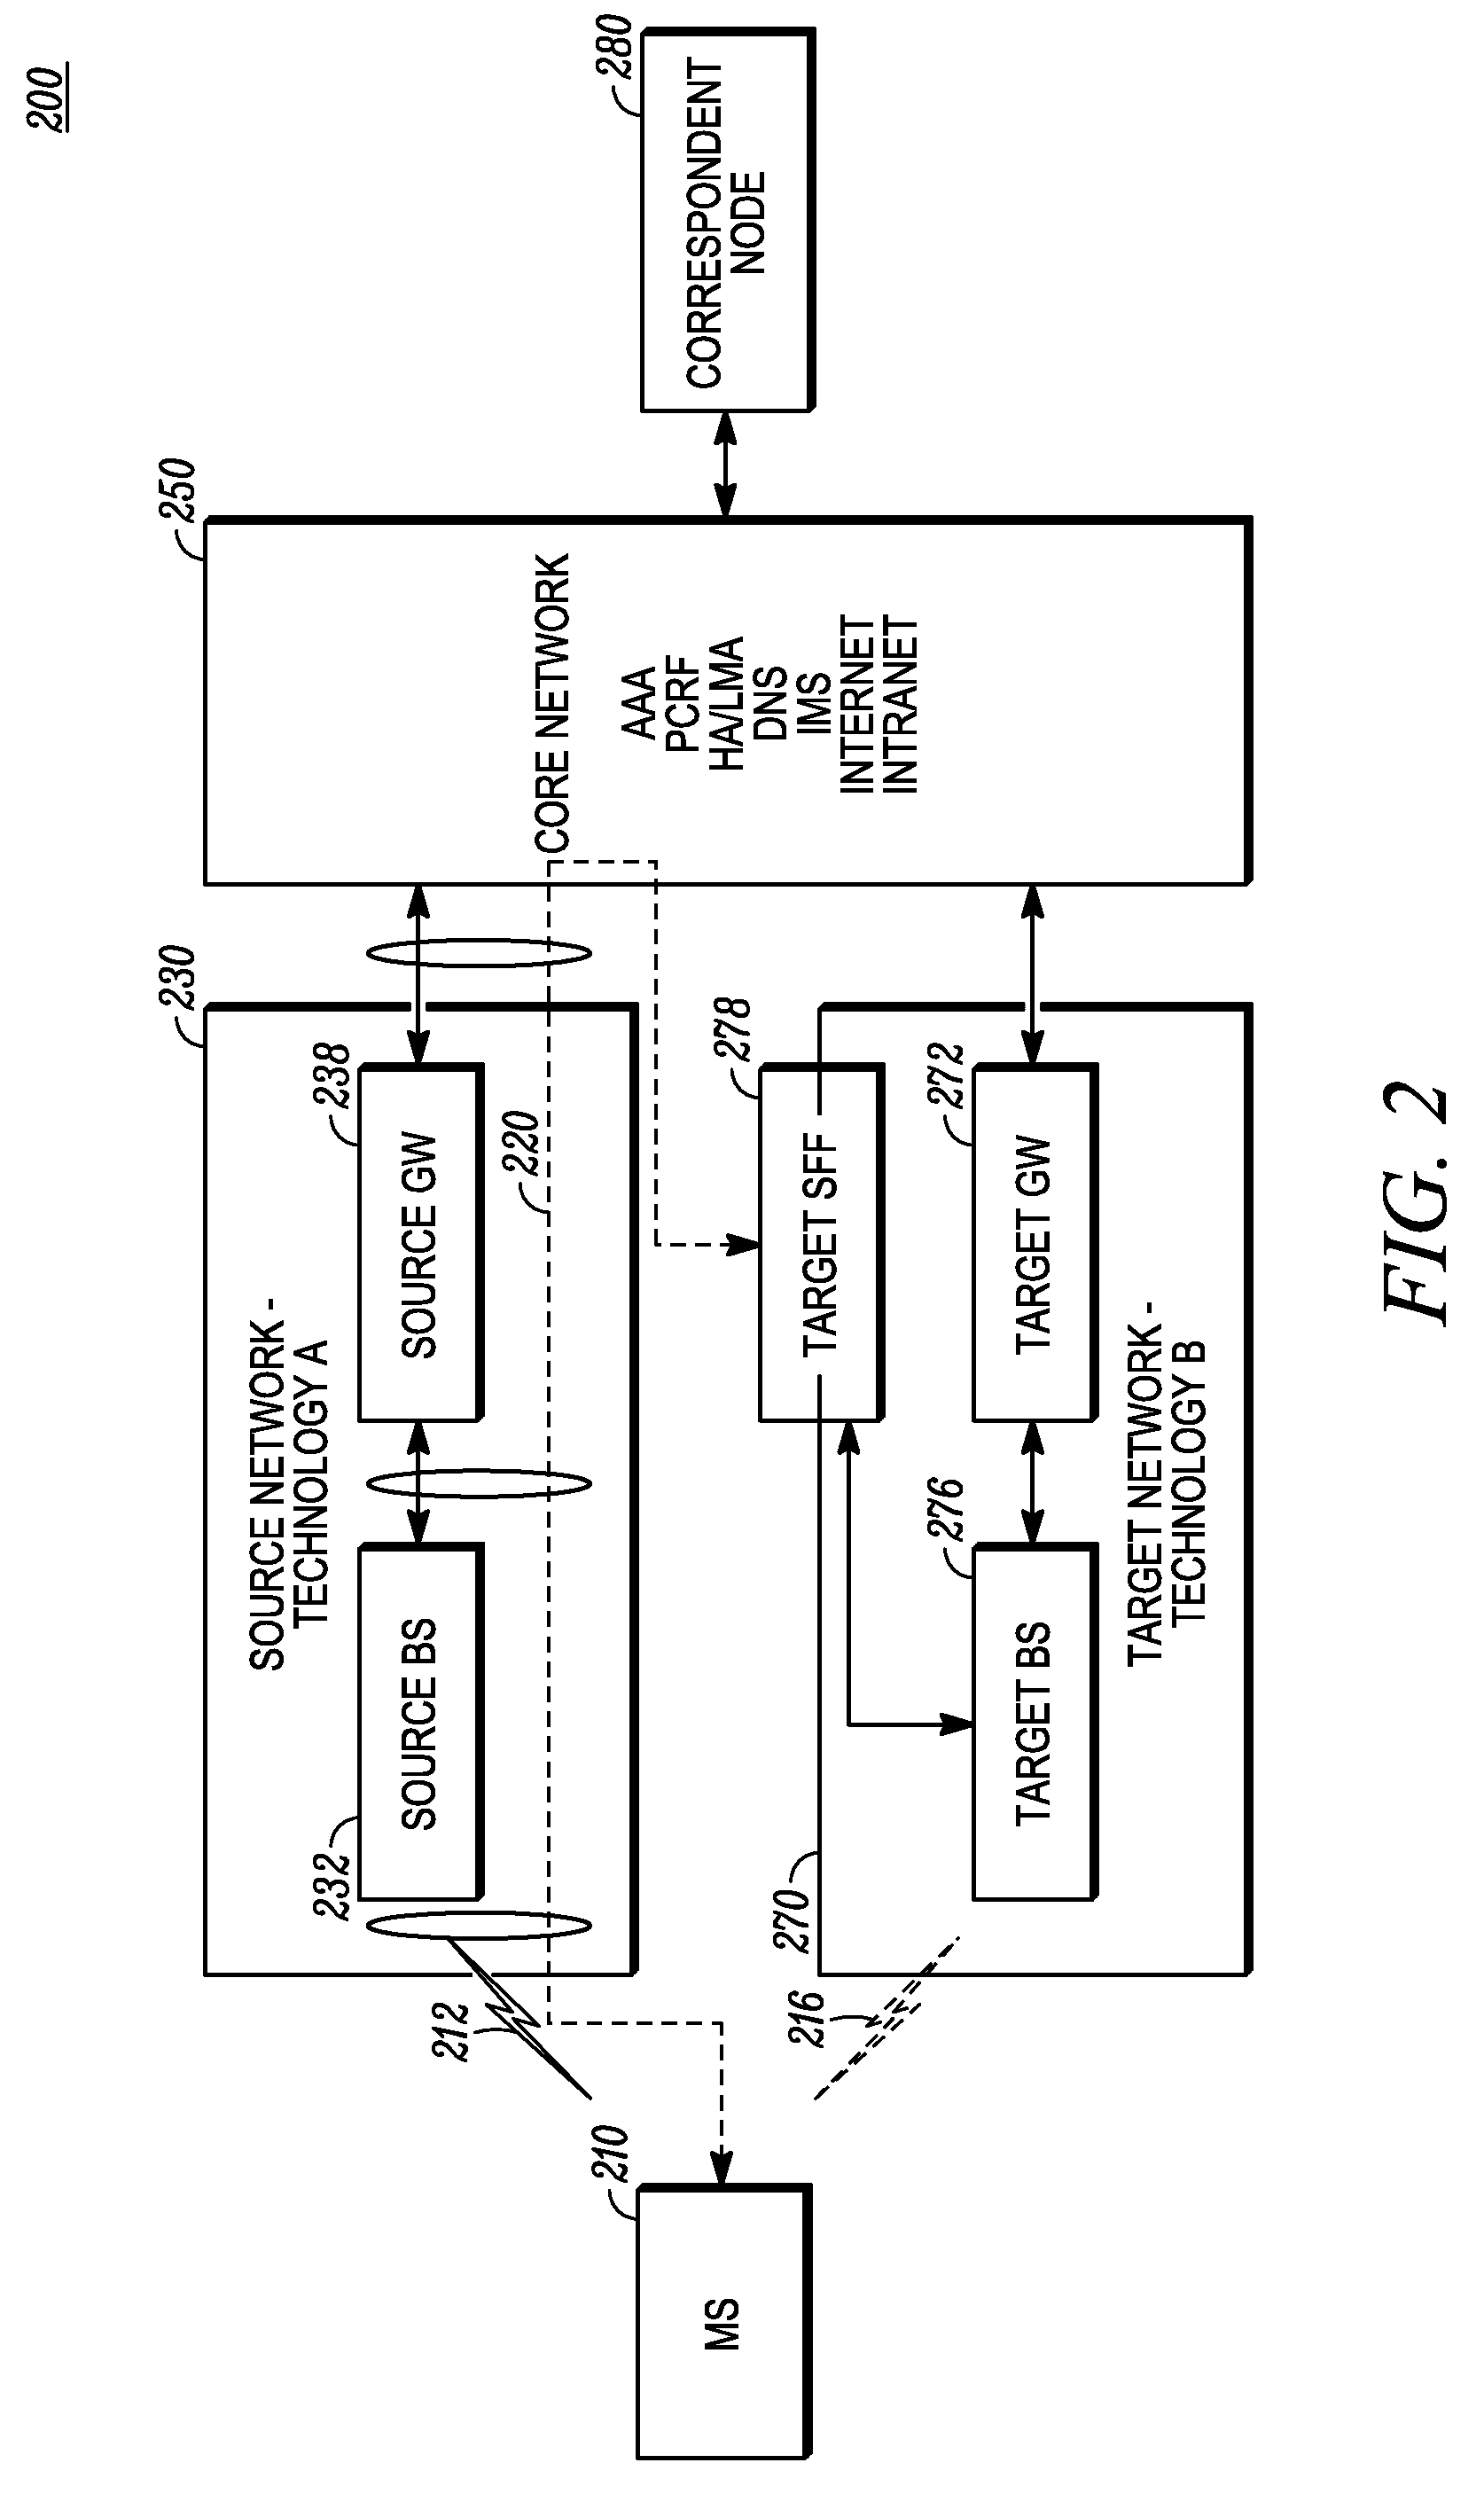 Method for Hand-Over In A Heterogeneous Wireless Network